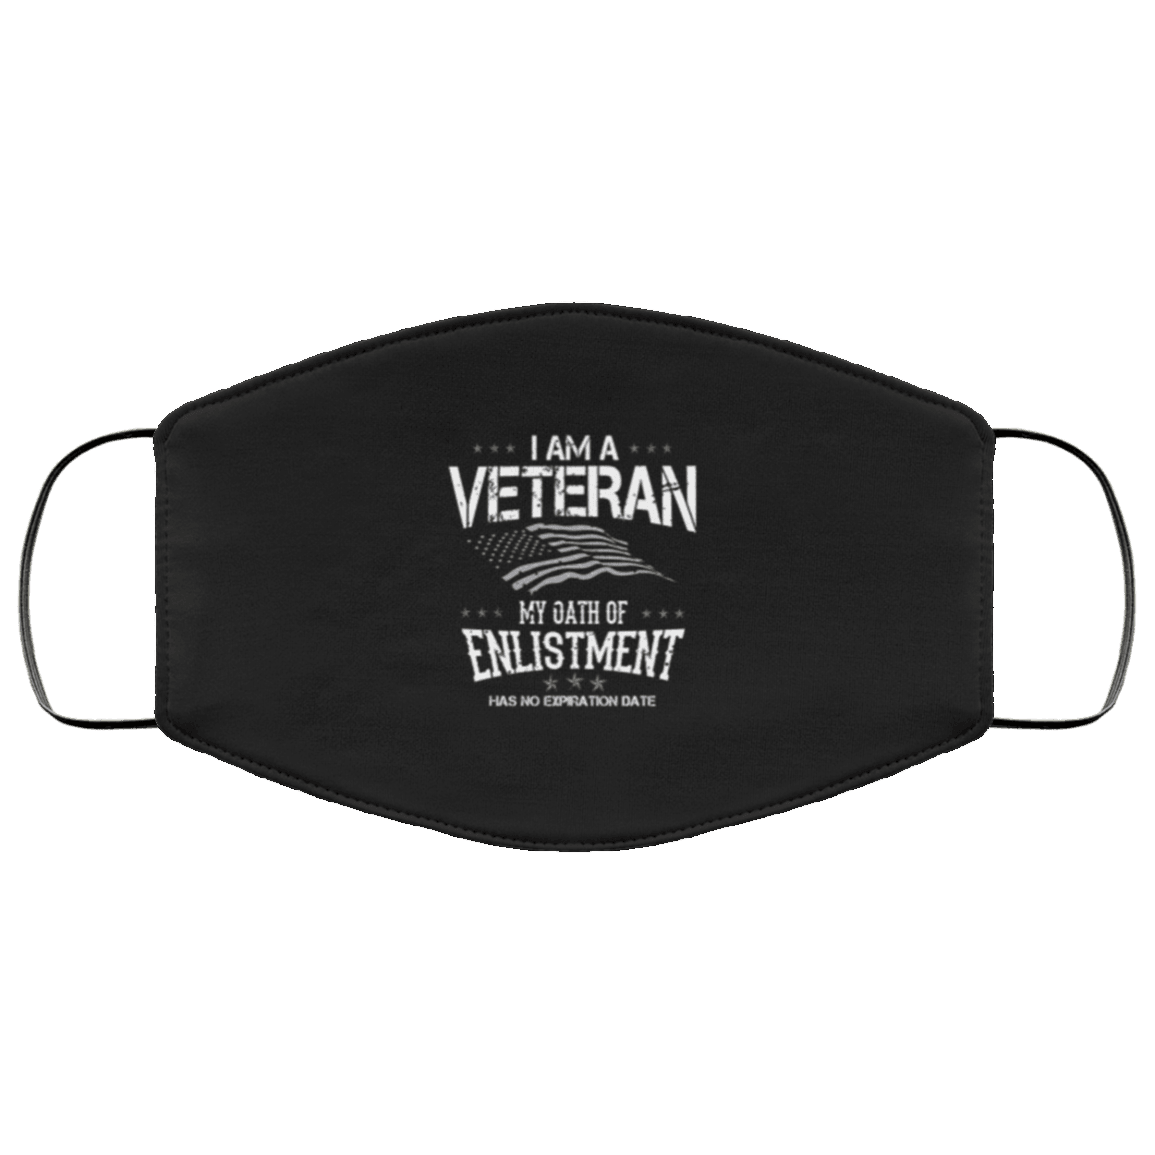 Designs by MyUtopia Shout Out:I Am A Veteran My Oath of Enlistment Has No Expiration Date Adult Fabric Face Mask with Elastic Ear Loops,Fabric Face Mask / Black / Adult,Fabric Face Mask